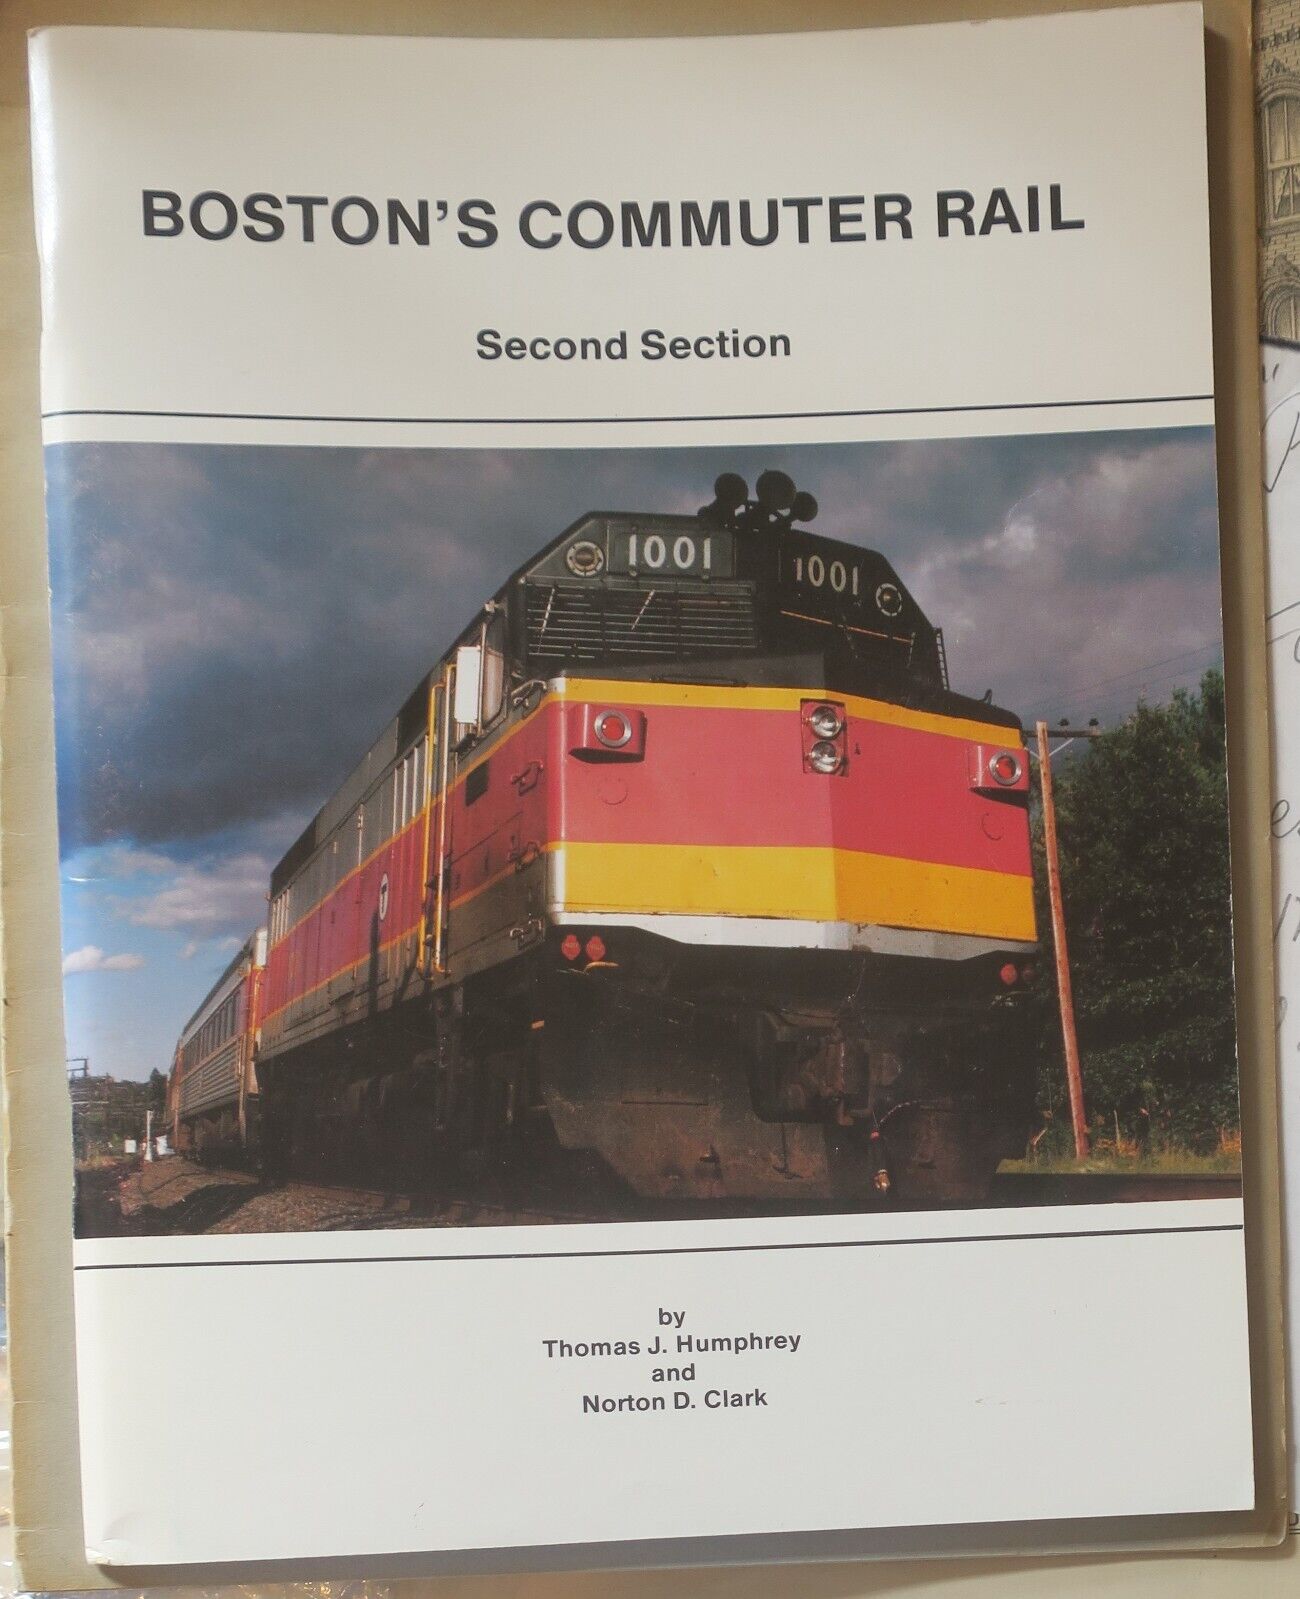 Boston\'s Commuter Rail: Second Section-many historical photos,trains,depots,cars